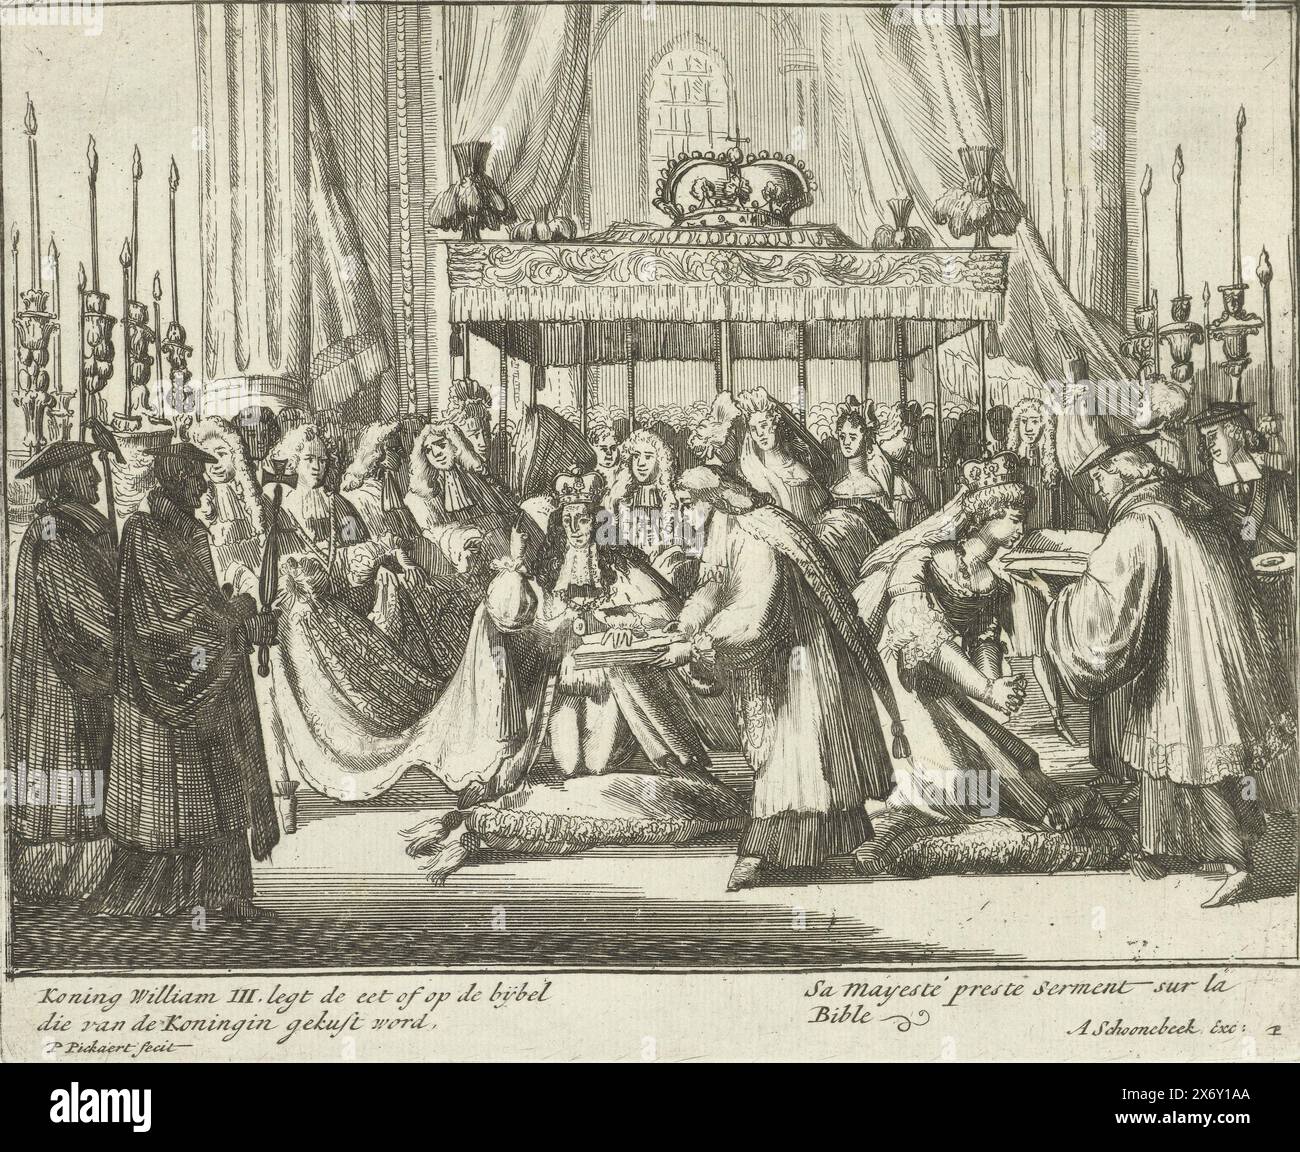 William III takes the oath during the coronation, 1689, King William III places the food or on the Bible that is kissed by the Queen (title on object), Engelant's sheriff's theater depicting the Glorieuse crowning William III and Maria II as King and Queen of great Brittany and Vrankryk and Yrlant, etc. II Part. (series title on object), During the coronation ceremony, William III takes the oath on the Bible, Mary kisses the Bible, April 21, 1689. Numbered at the top right: 208. Plate P in the series 'English theater' about the Glorious Revolution 1688-1689 (second part). With captions in Dutc Stock Photo